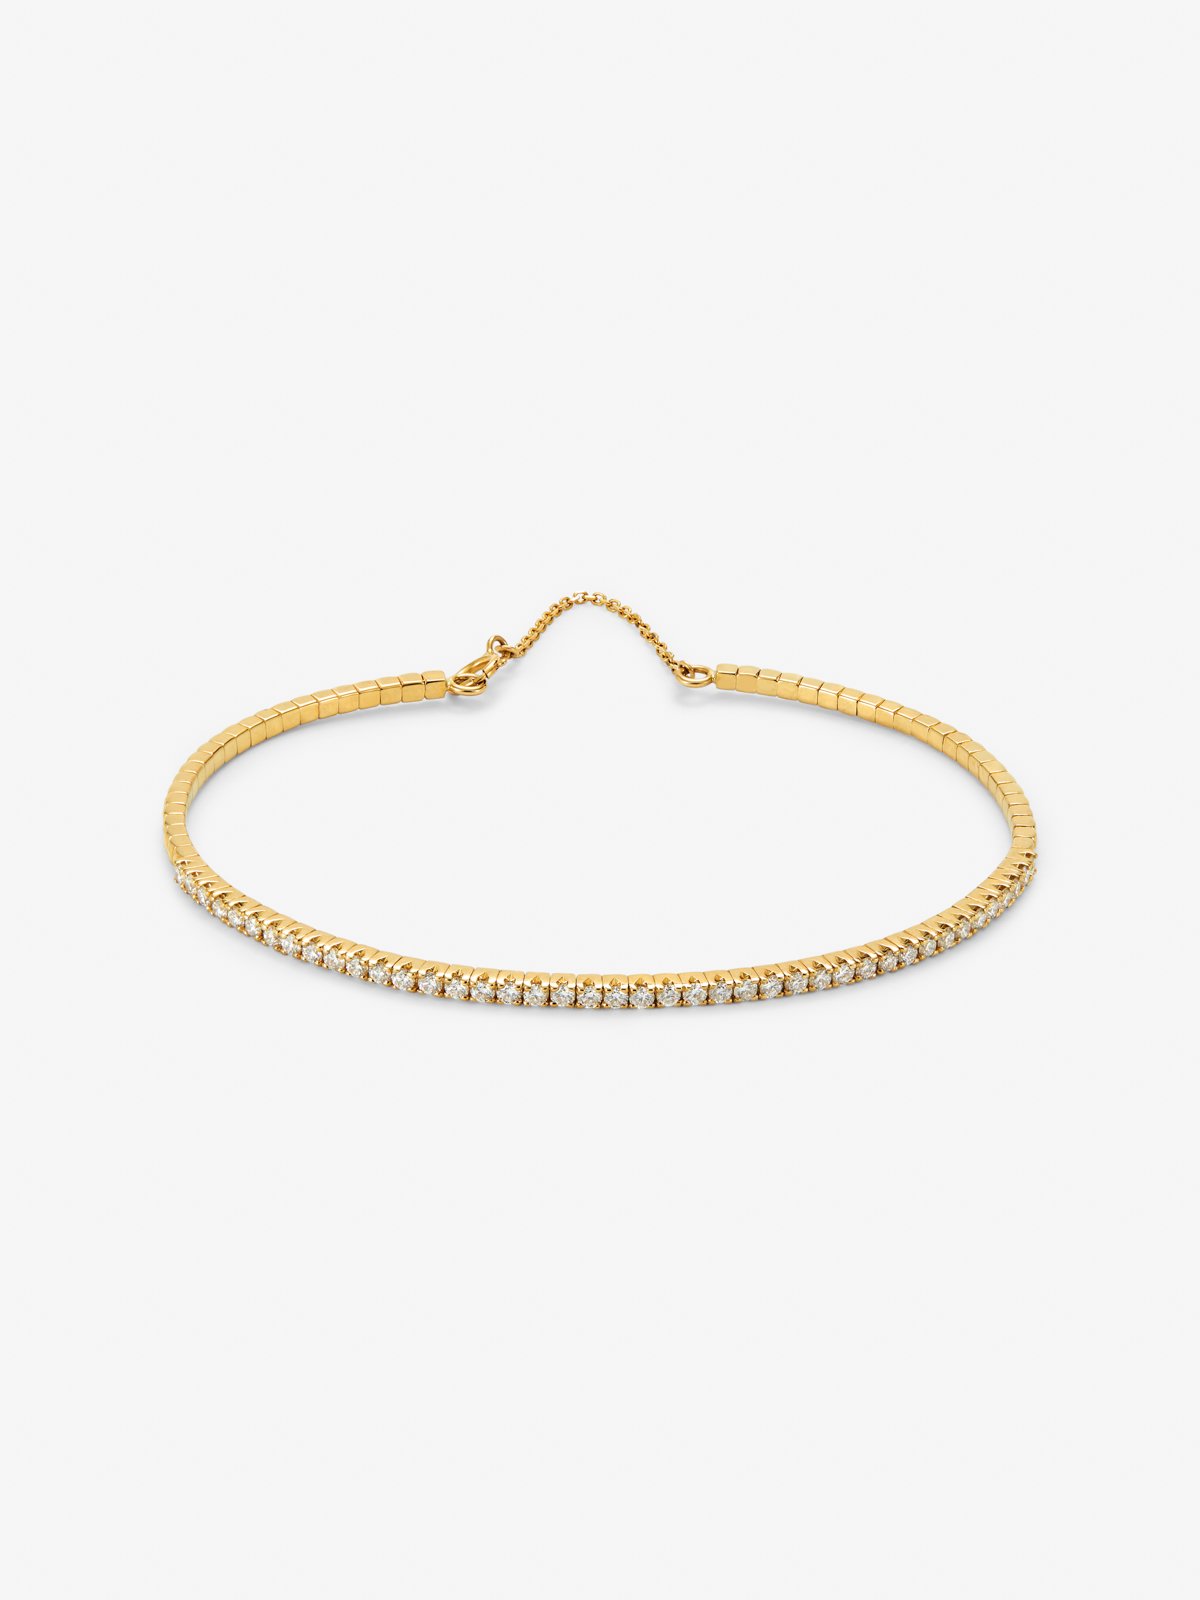 Rigid 18K yellow gold bracelet with 42 brilliant-cut diamonds with a total of 0.75 cts